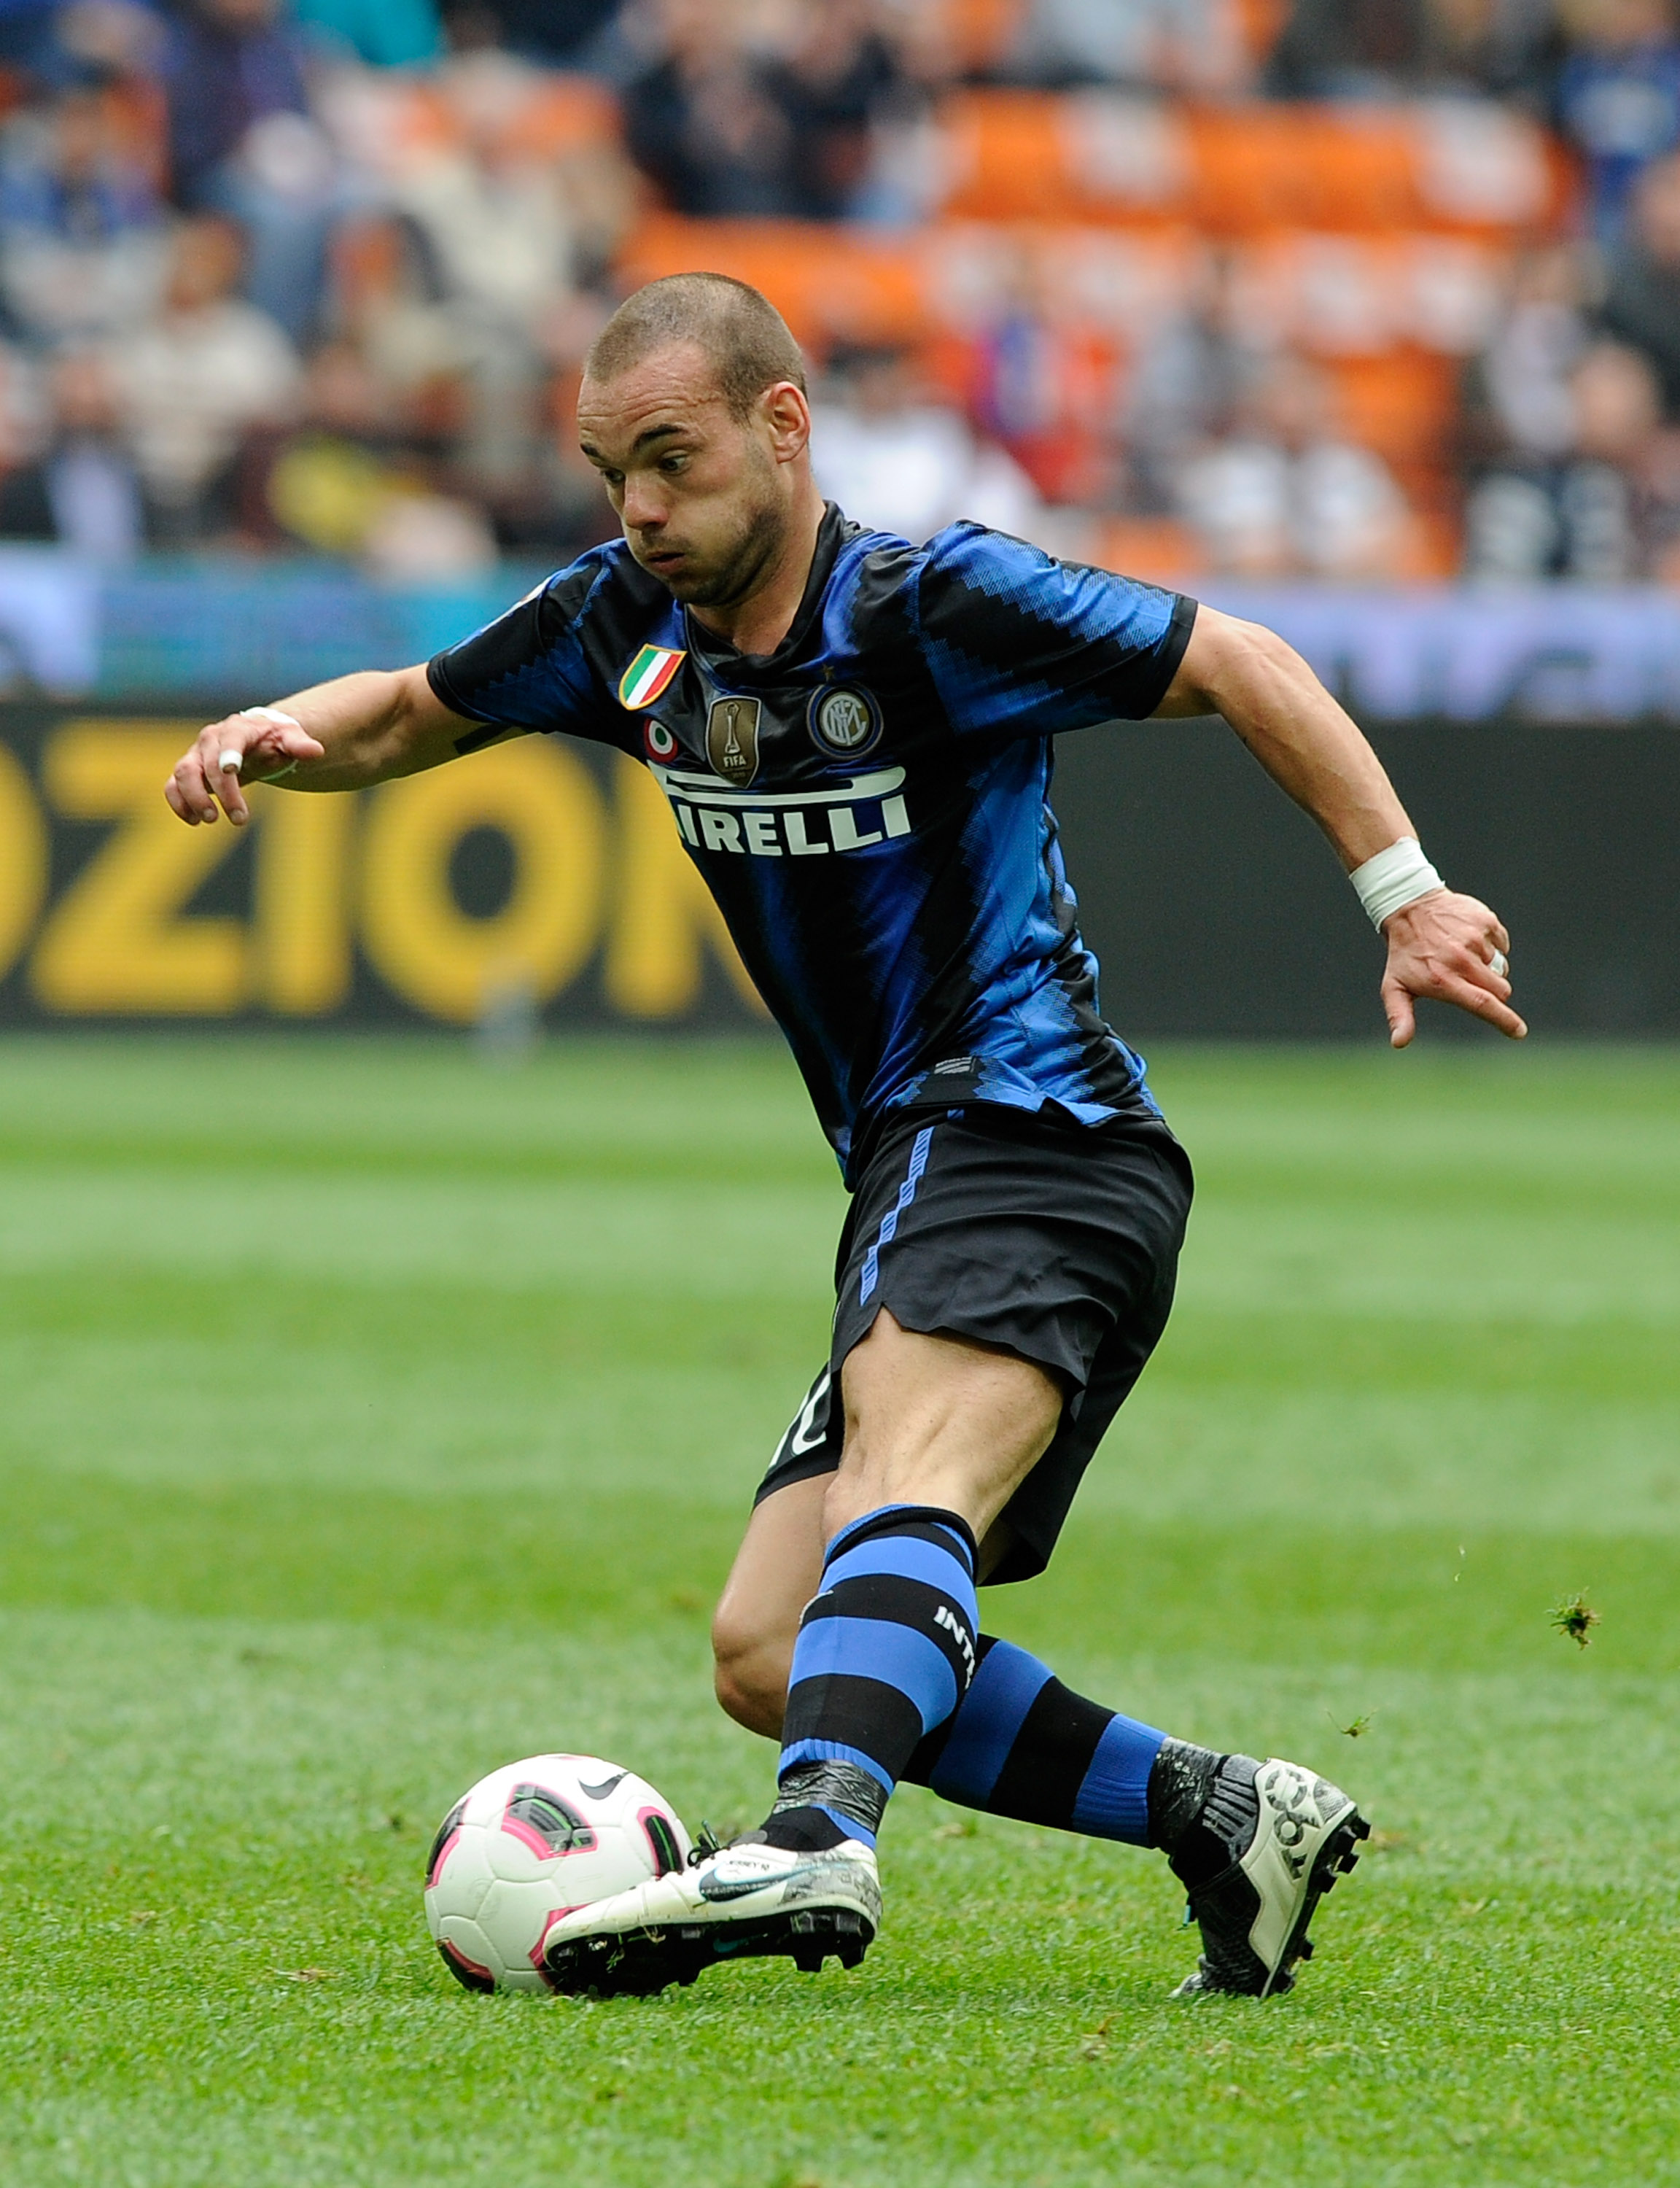 MILAN, ITALY - APRIL 23:  Wesley Sneijder of FC Inter Milan during the Serie A match between FC Internazionale Milano and SS Lazio at Stadio Giuseppe Meazza on April 23, 2011 in Milan, Italy.  (Photo by Claudio Villa/Getty Images)